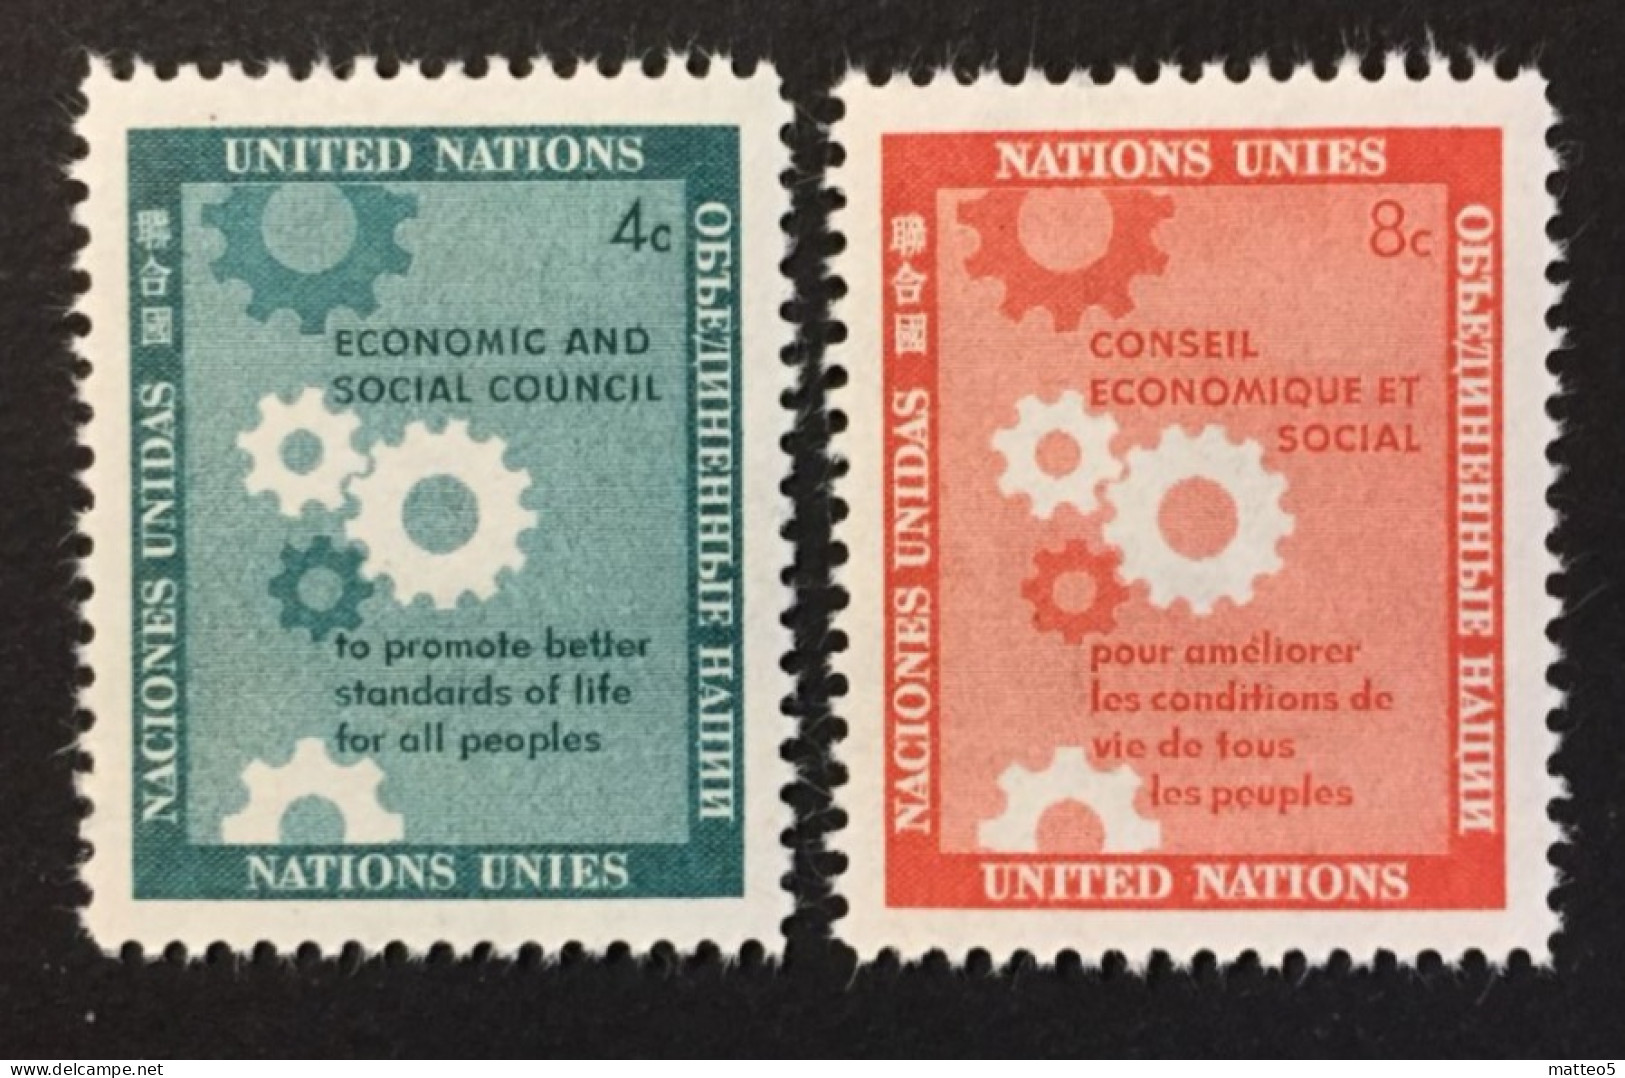 1958 - United Nations UNO UN ONU - Economic And Social Council, Gearwheels -  Unused - Neufs